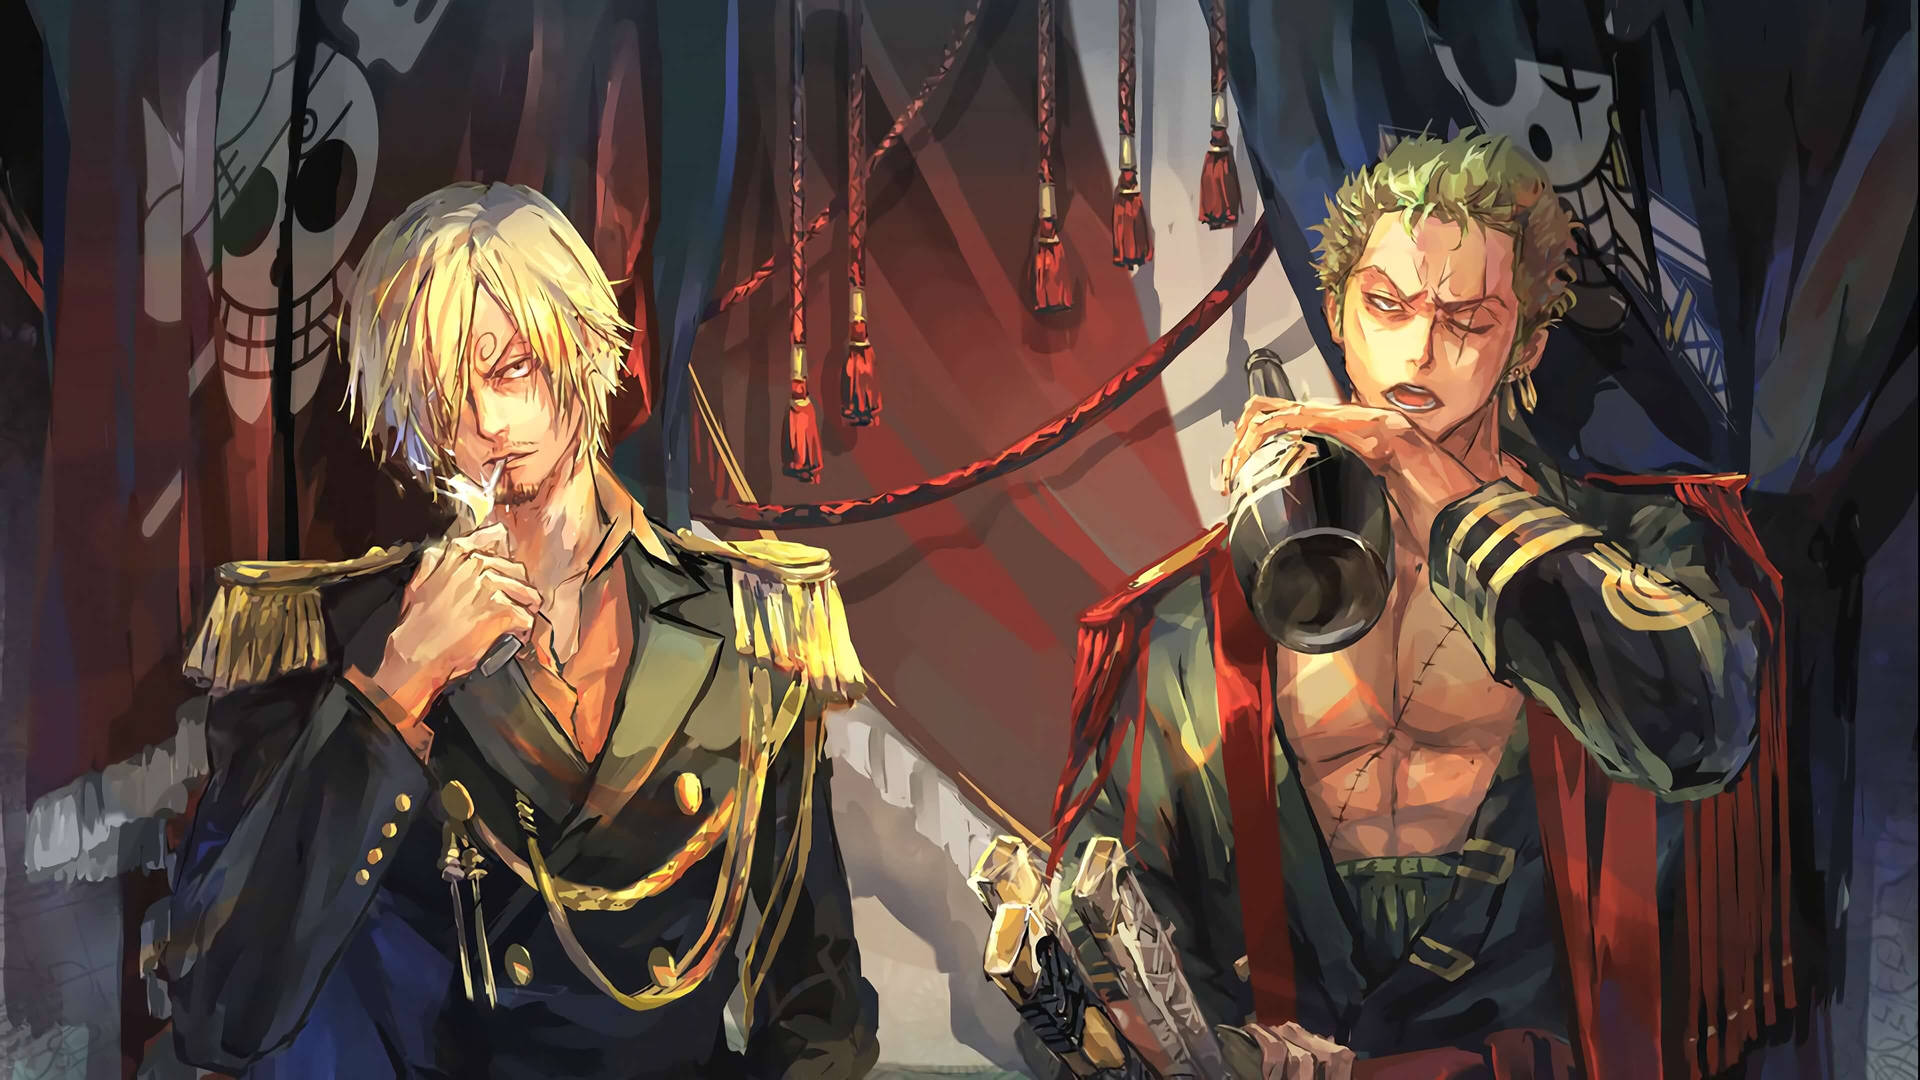 Sanji and Zoro against evil forces in their soldier outfits Wallpaper